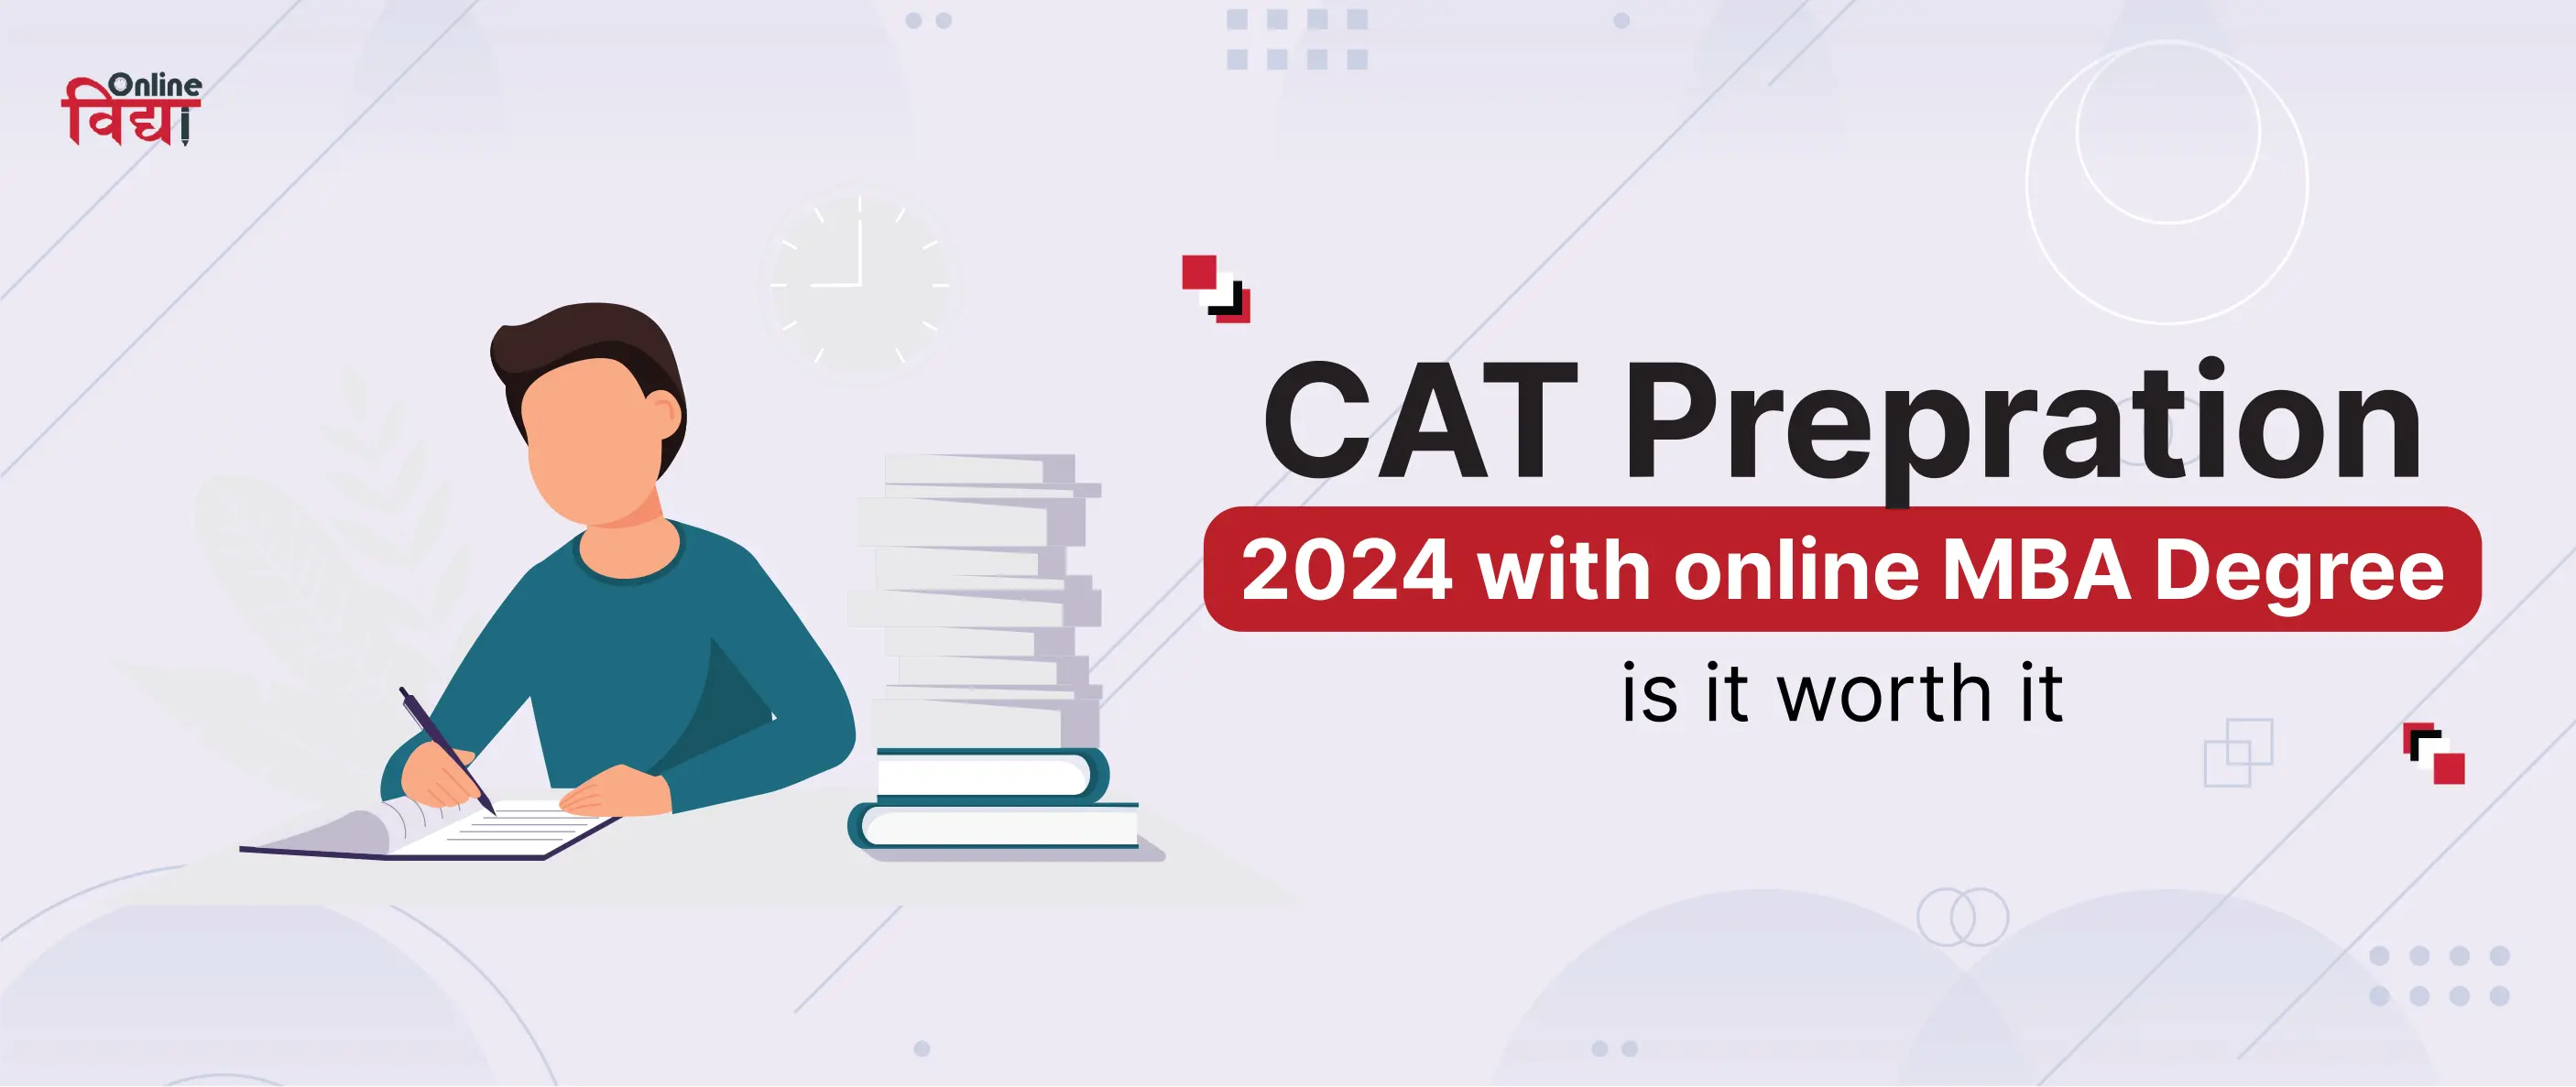 CAT preparation 2024 with online MBA Degree: is it worth it?